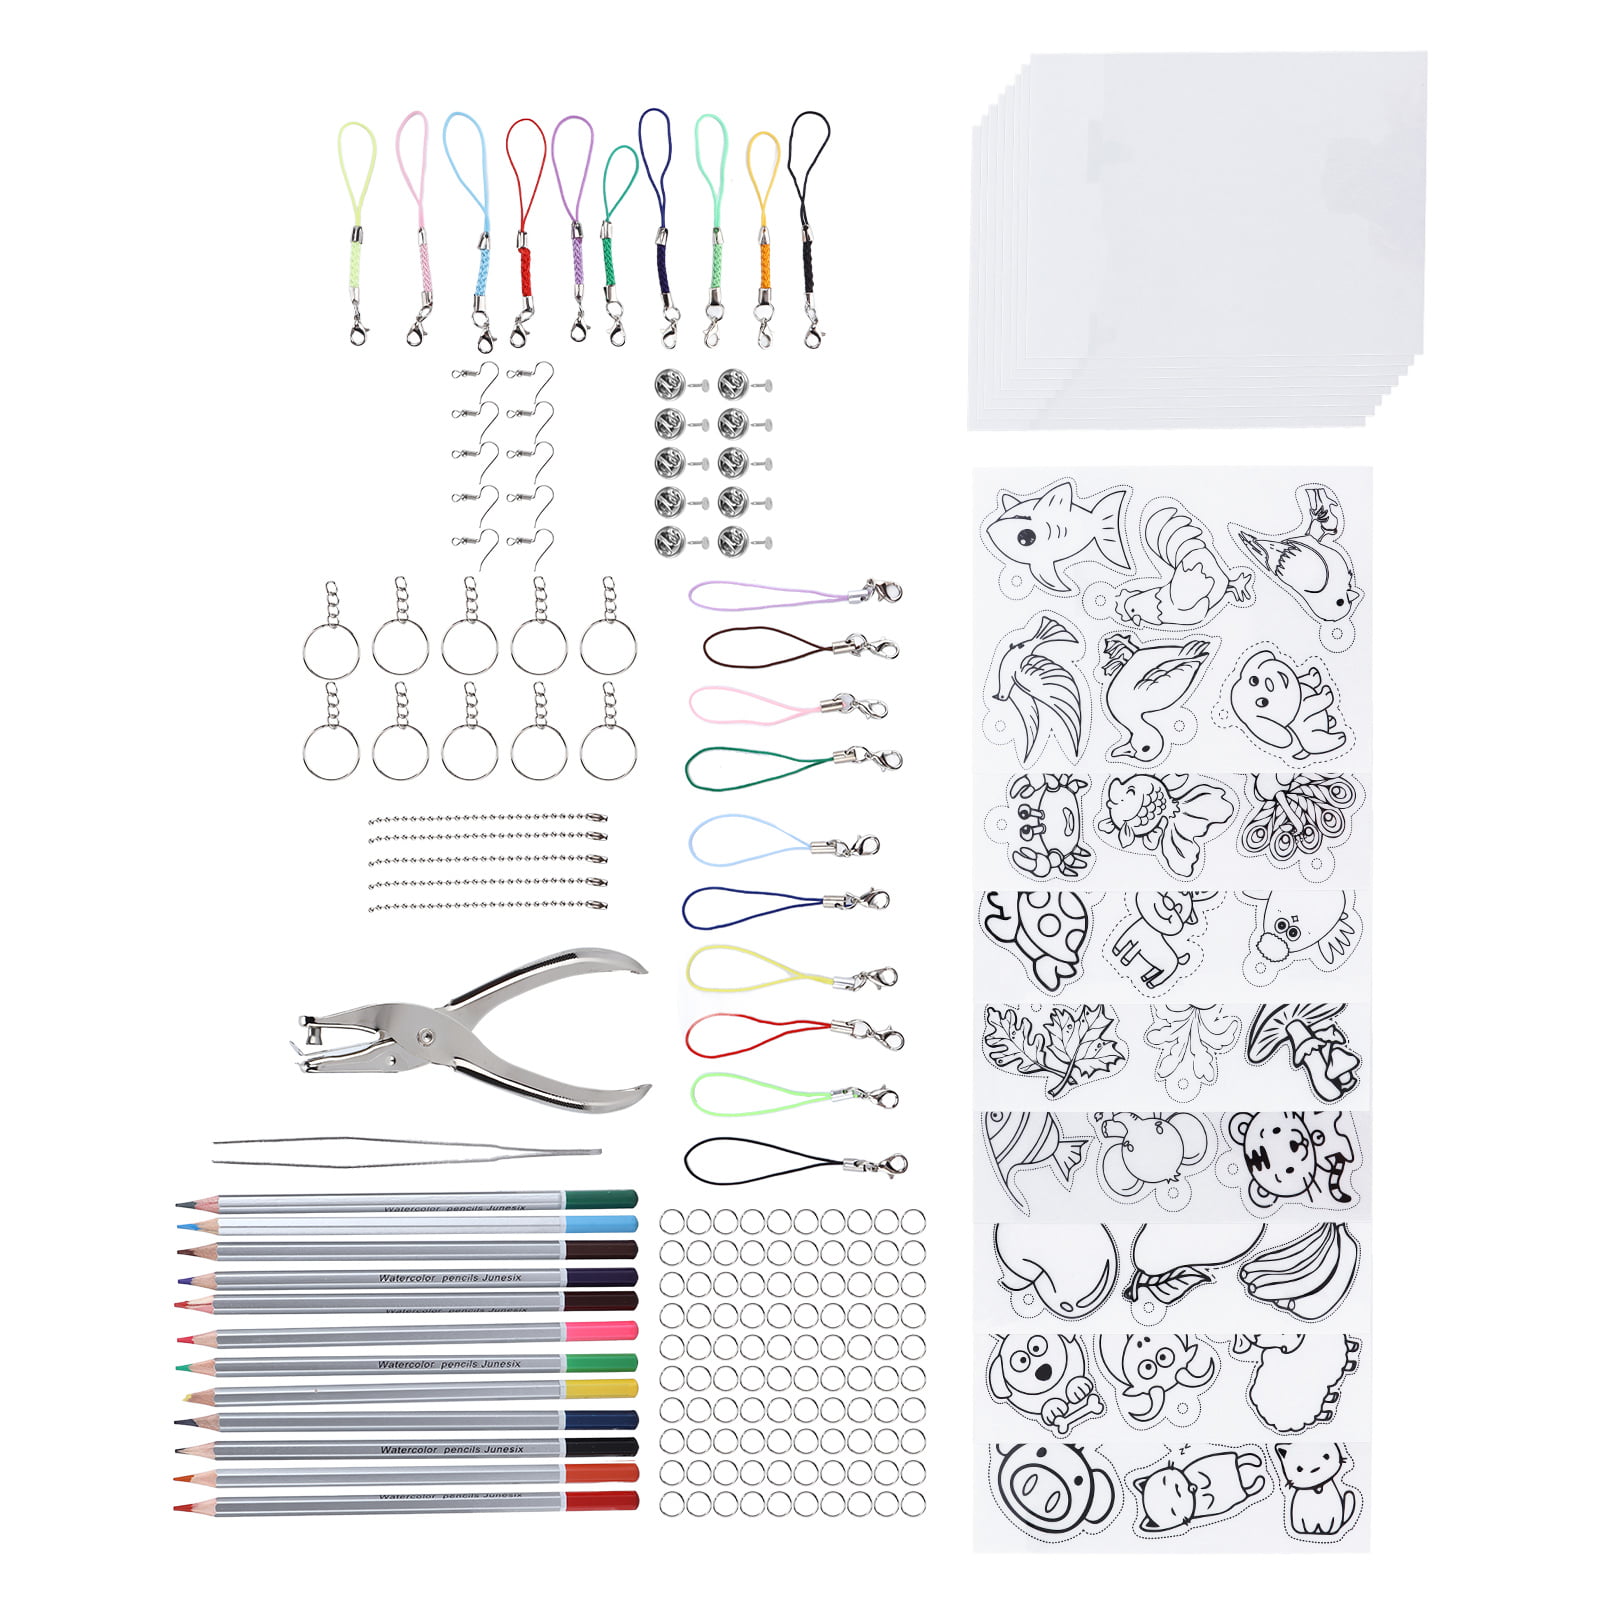 60 Pcs Heat Shrink Plastic Sheet Kit,heat Shrinky Sheets Creative  Pack,including 10Pcs Blank Shrink Film Paper And 5 Pcs Shrinky Art Paper  With Pattern,hole Punch,keychains,pencils For Kids – Casazo